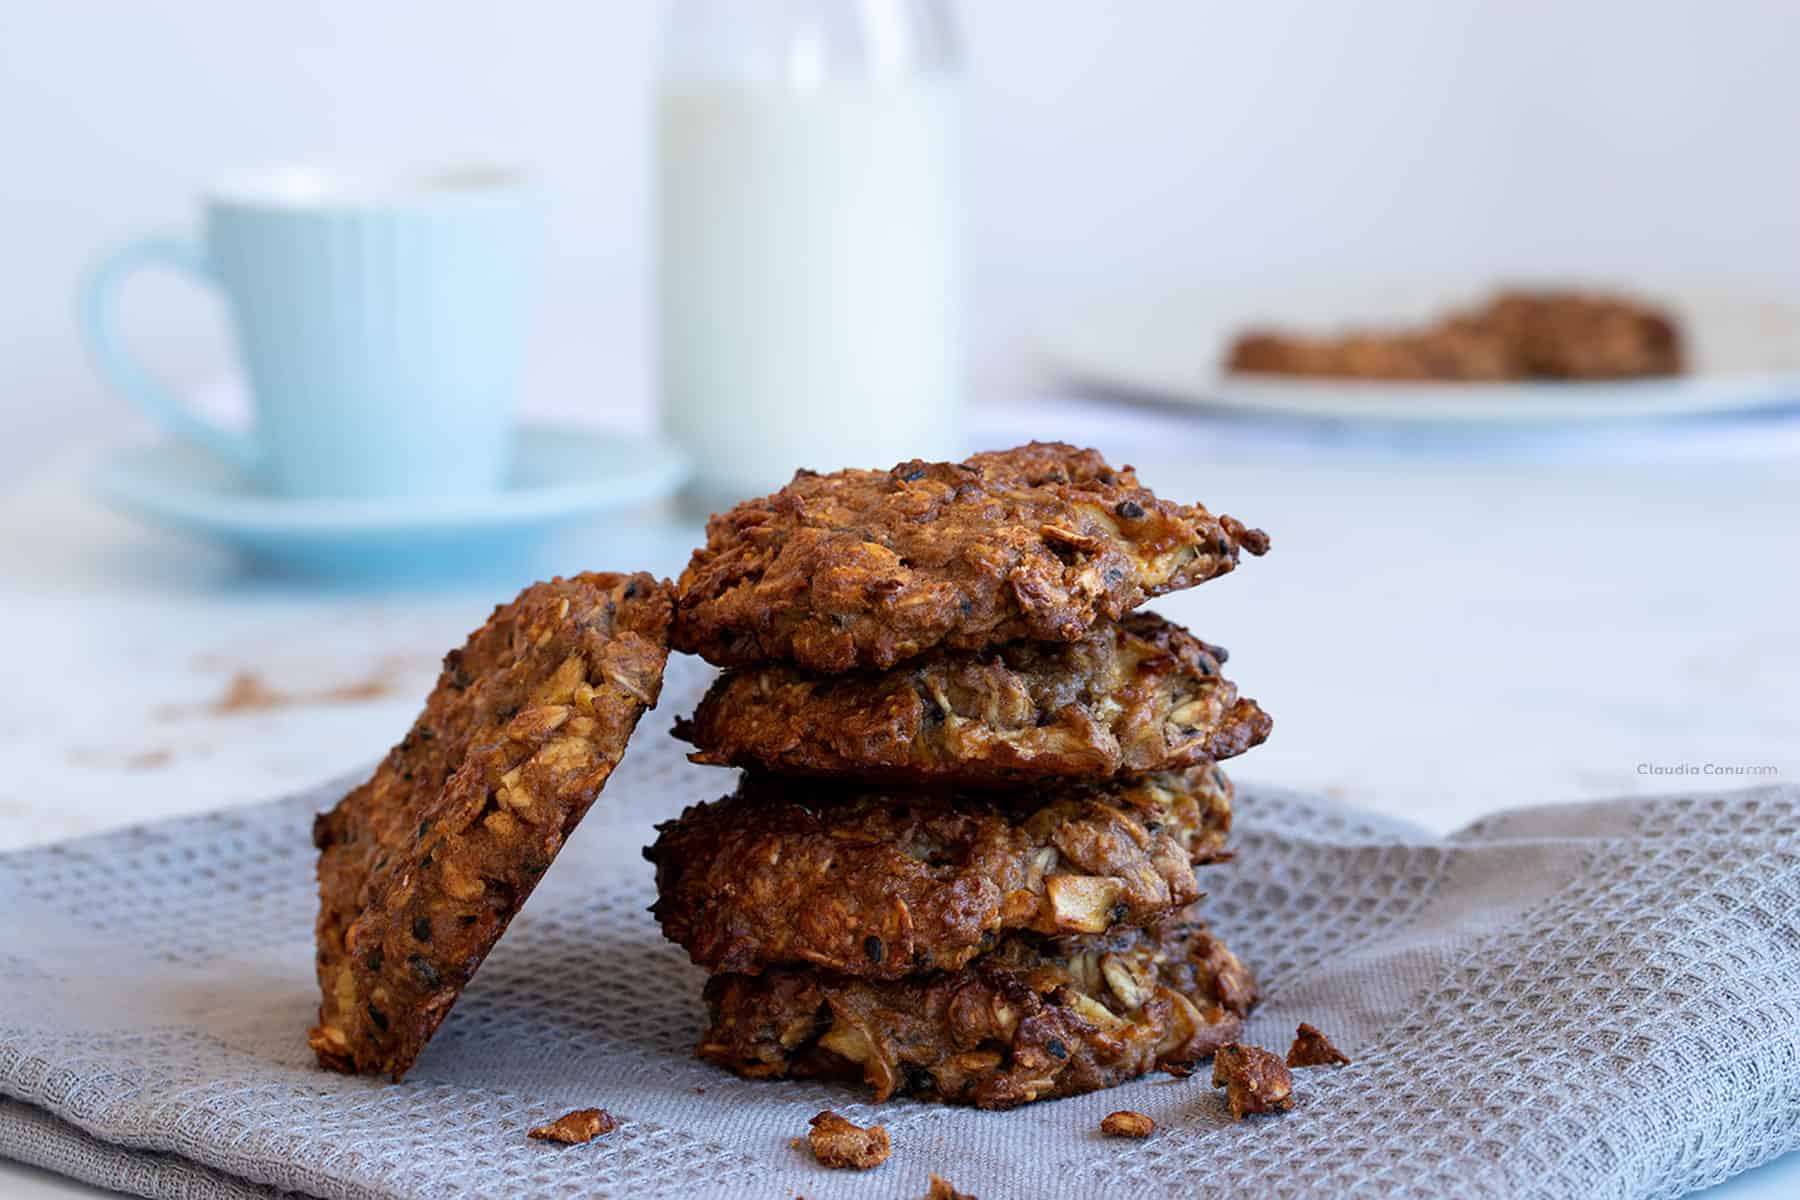 A pile of Oatmeal Cookies, a coffee mug and a bottle of milk